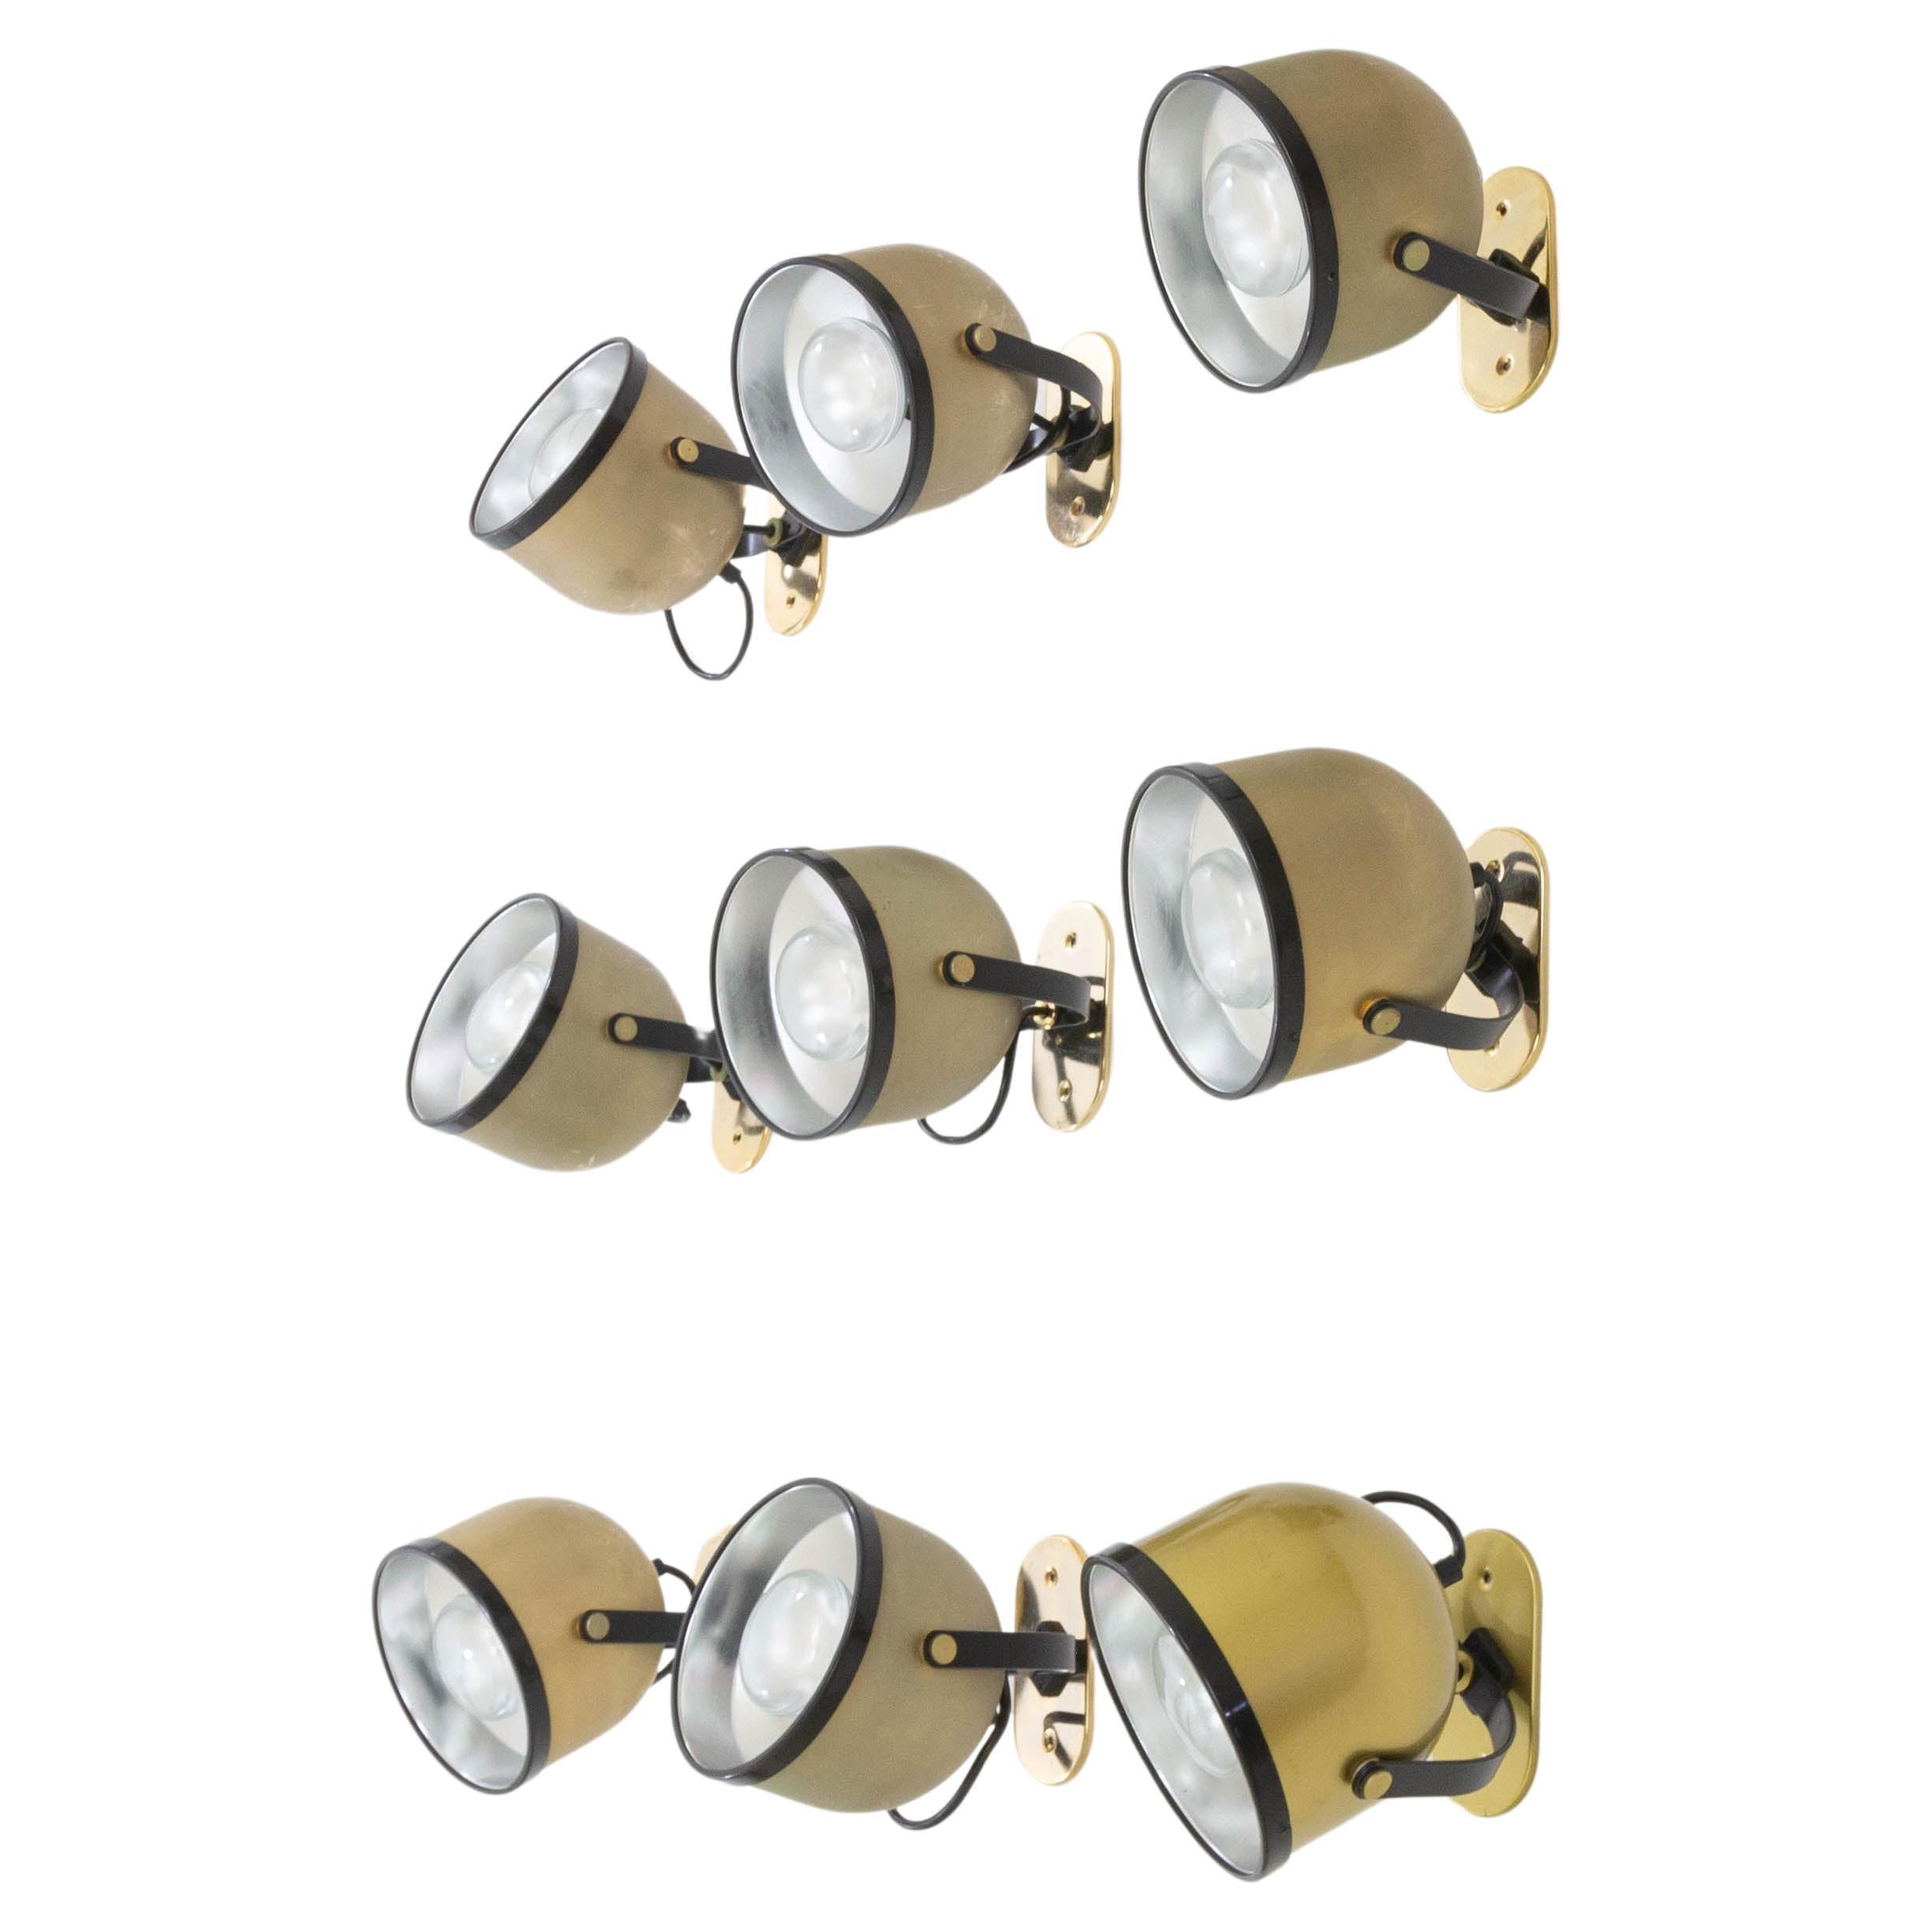 Set of nine brass swiveling spots designed by Gae Aulenti and Livio Castiglioni for Stilnovo in the 1970s. The spots can be used as wall lamps and as ceiling lamps.

The spots or projectors are fitted with a double rotation movement, allowing them